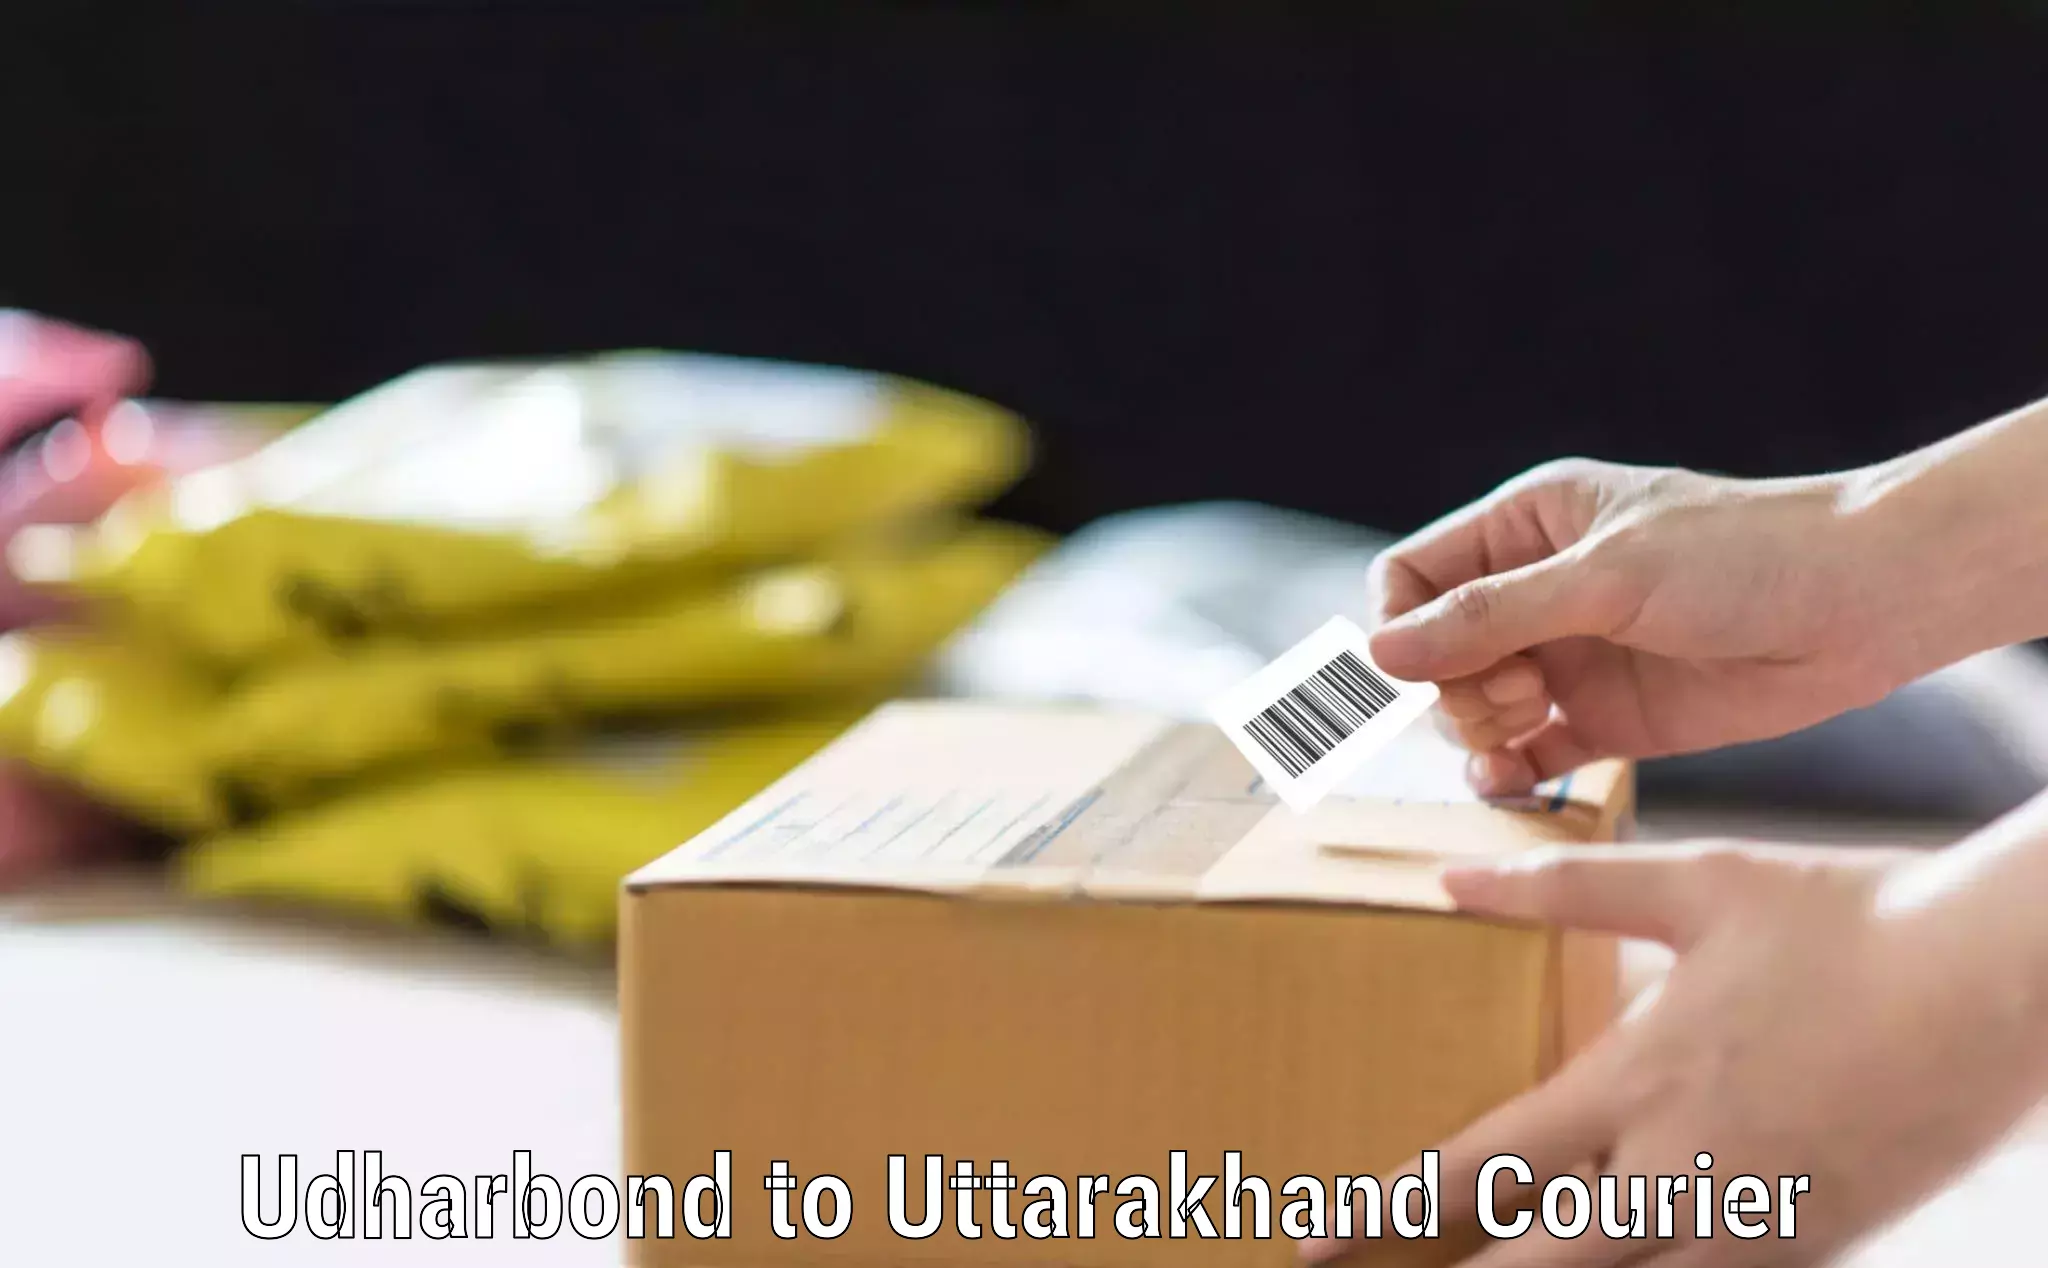 Baggage shipping service Udharbond to Ranikhet